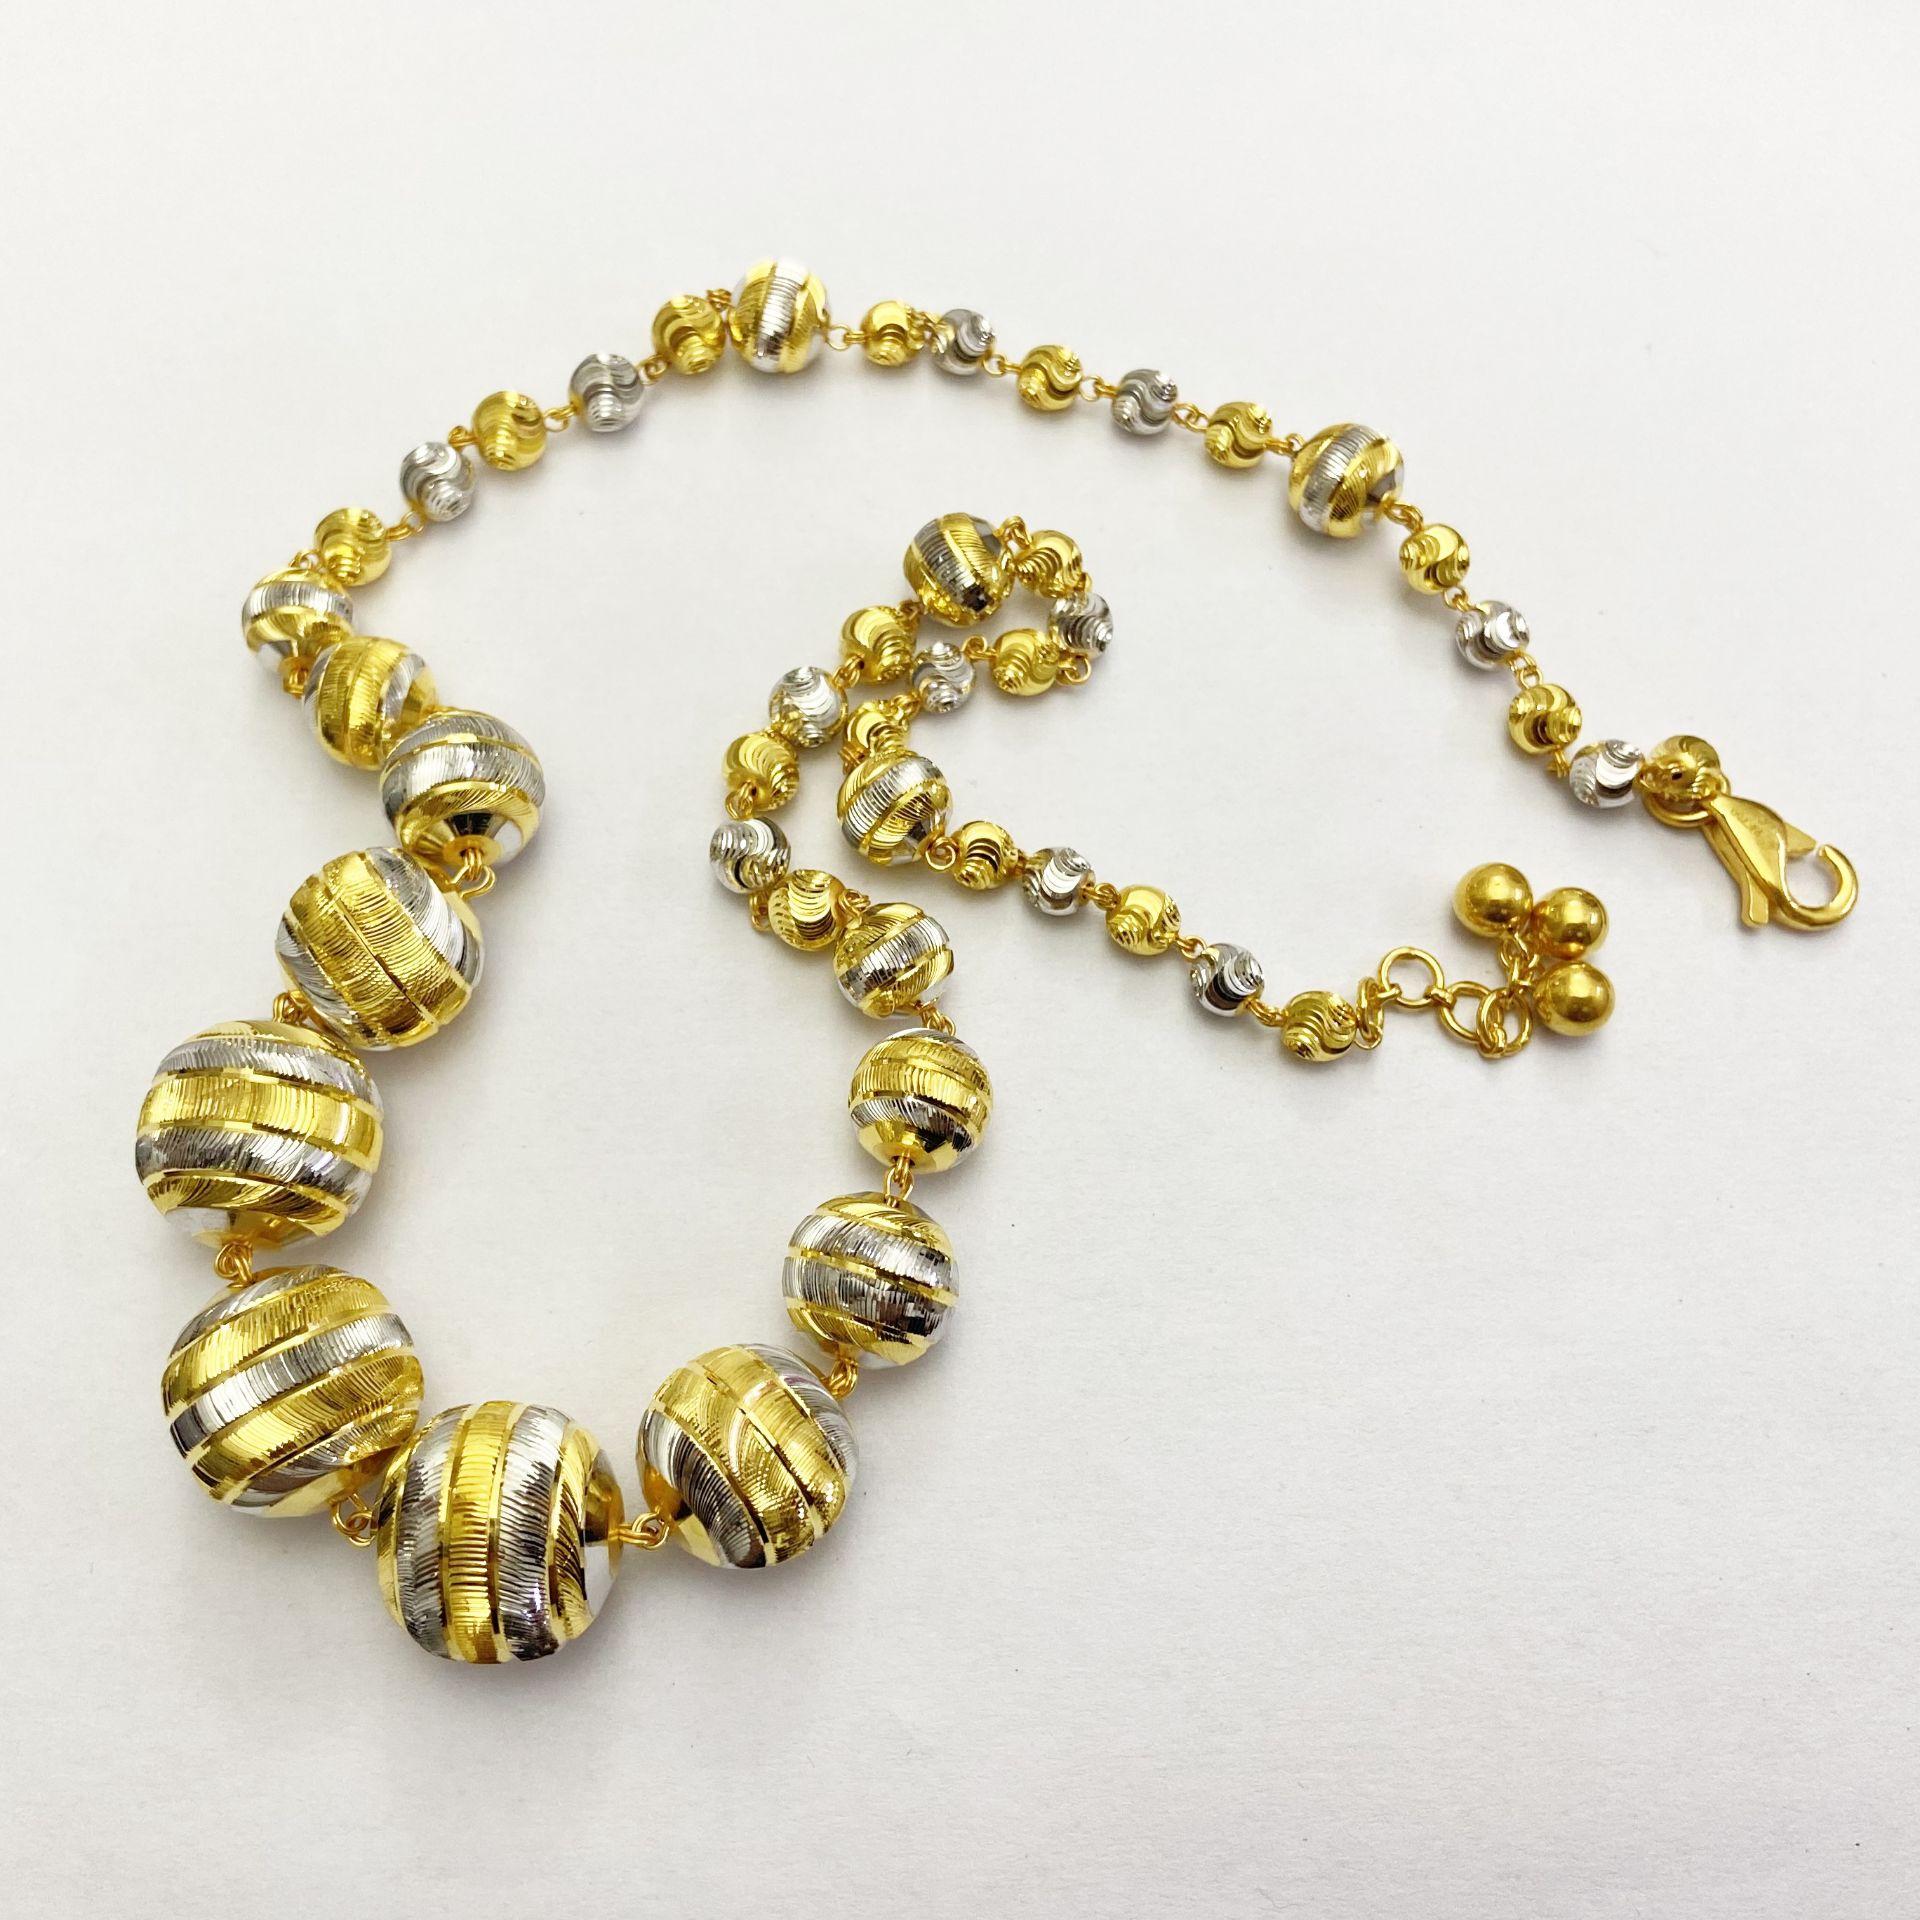 18 K / 750 Hallmarked Yellow and White Gold Chain Necklace - Image 3 of 3